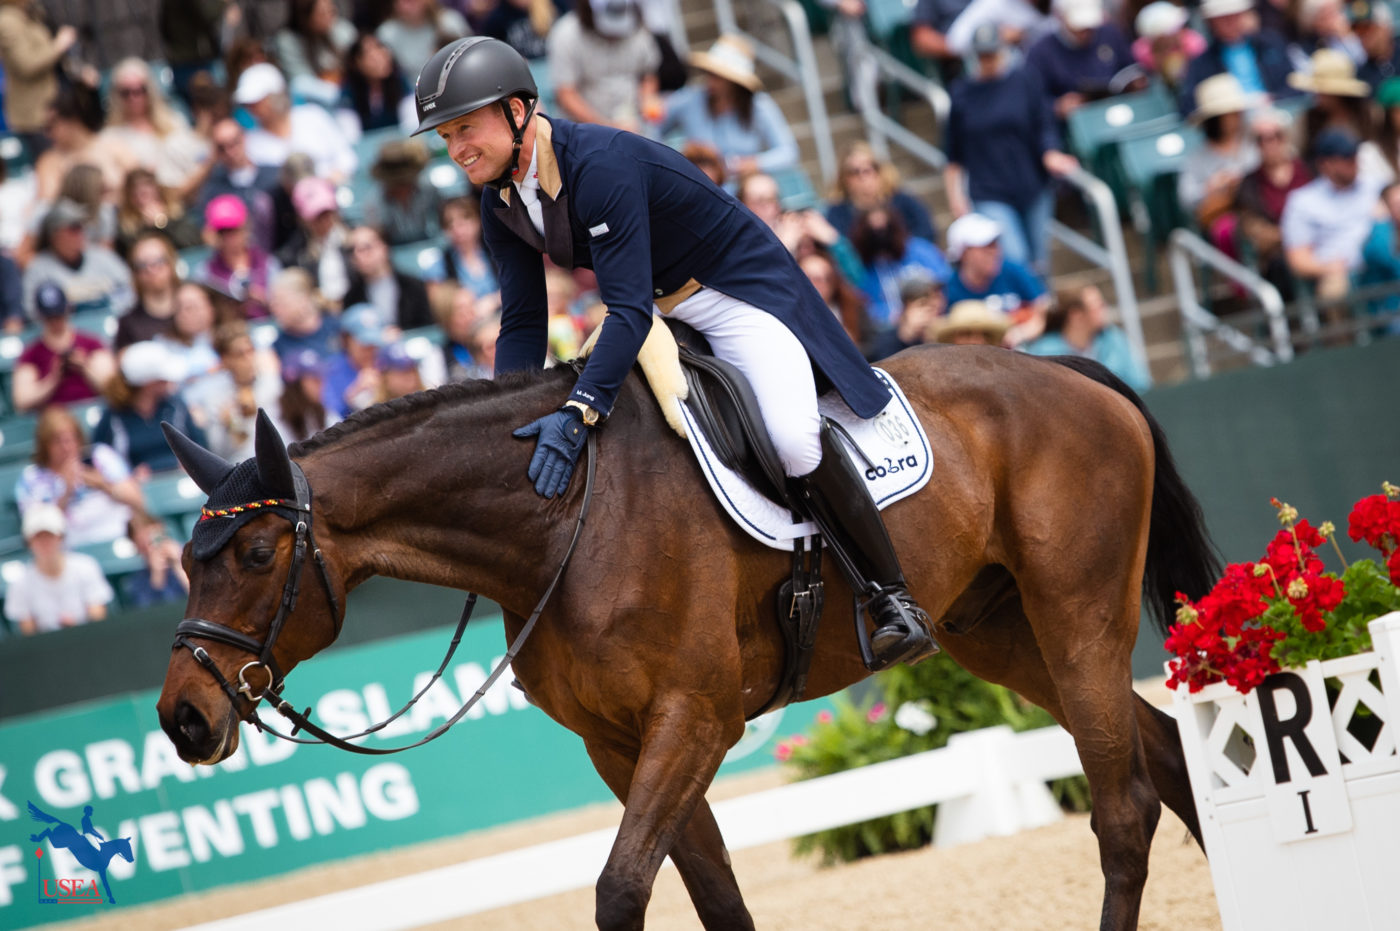 Michael Jung and FischerChipmunk FRH had the lowest dressage score in the five-star with a 20.1. USEA/ Meagan DeLisle